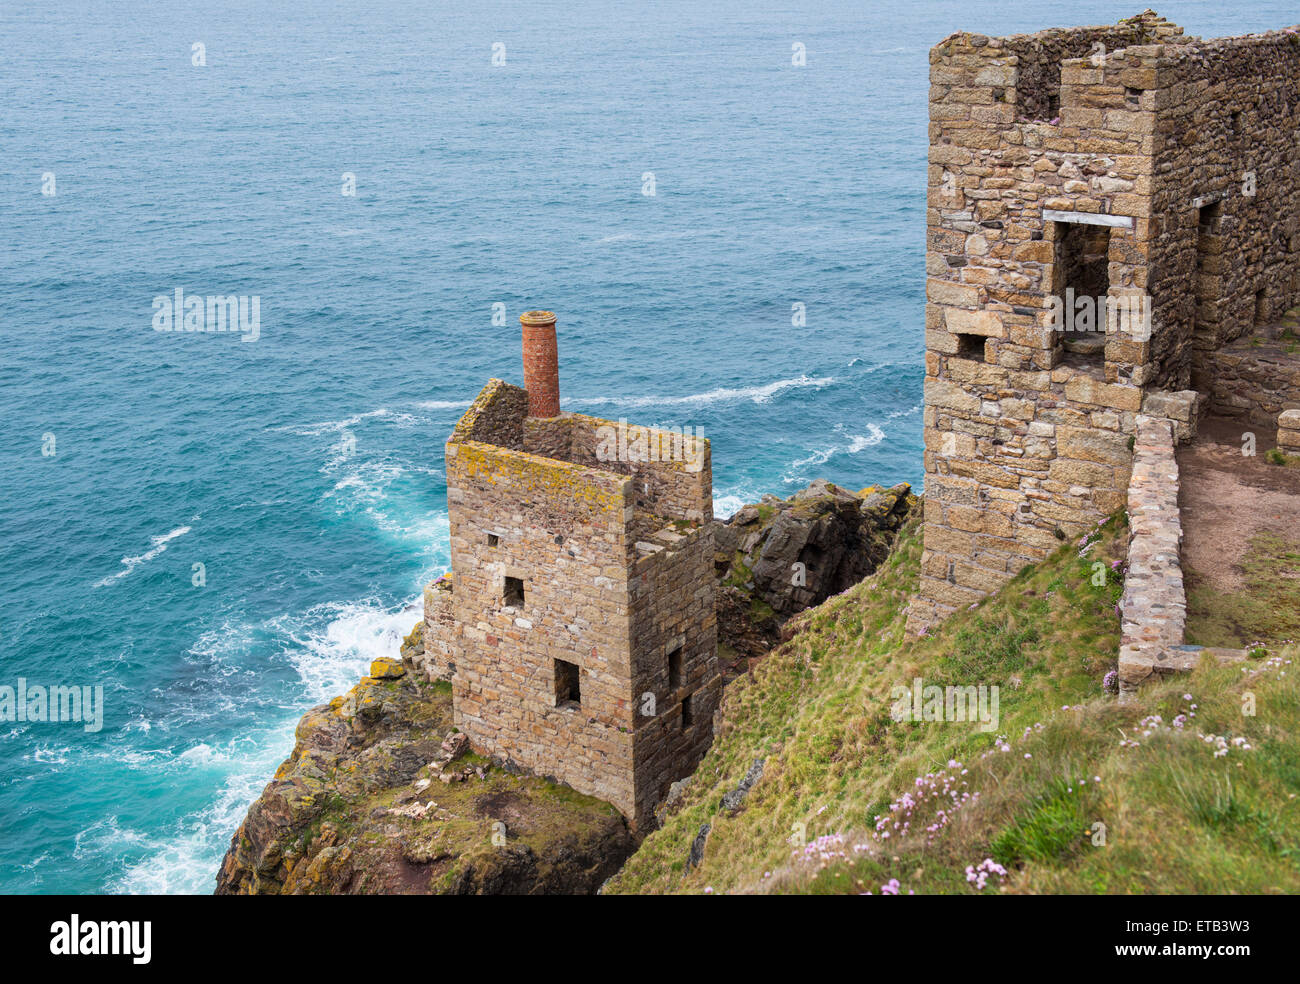 The Crown Mines at Botallack on the rugged north coast of Cornwall in England, UK Stock Photo